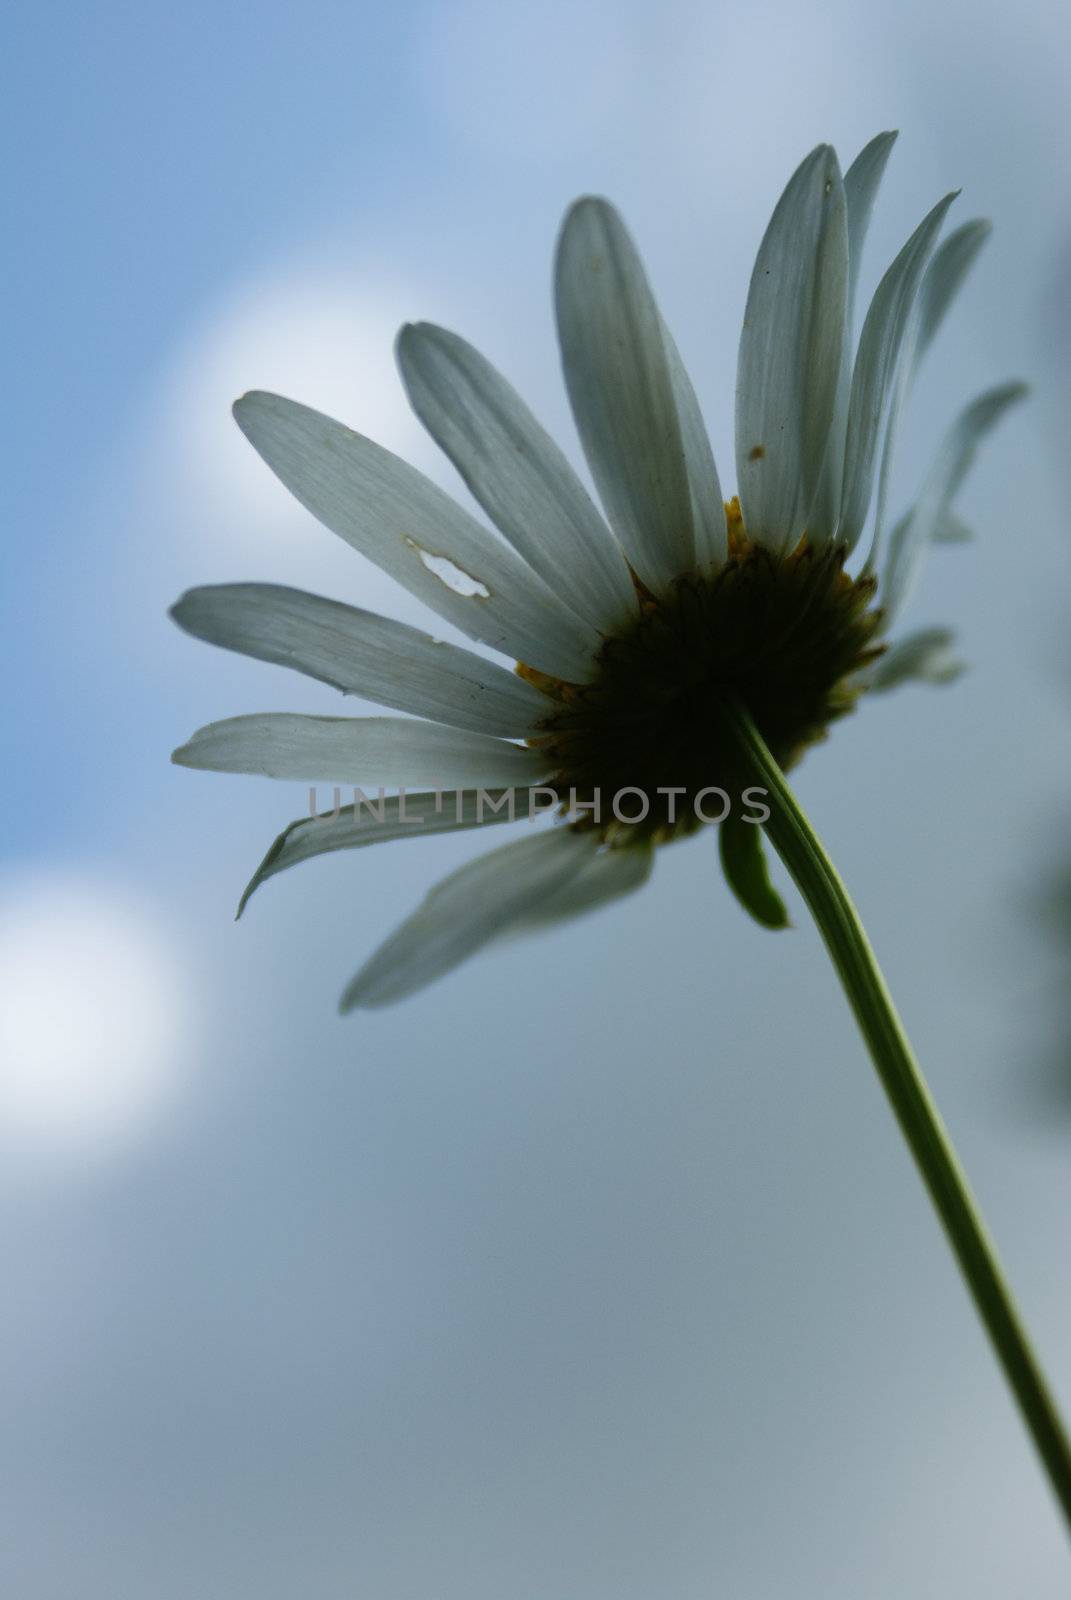 camomile in the sky by Katchen